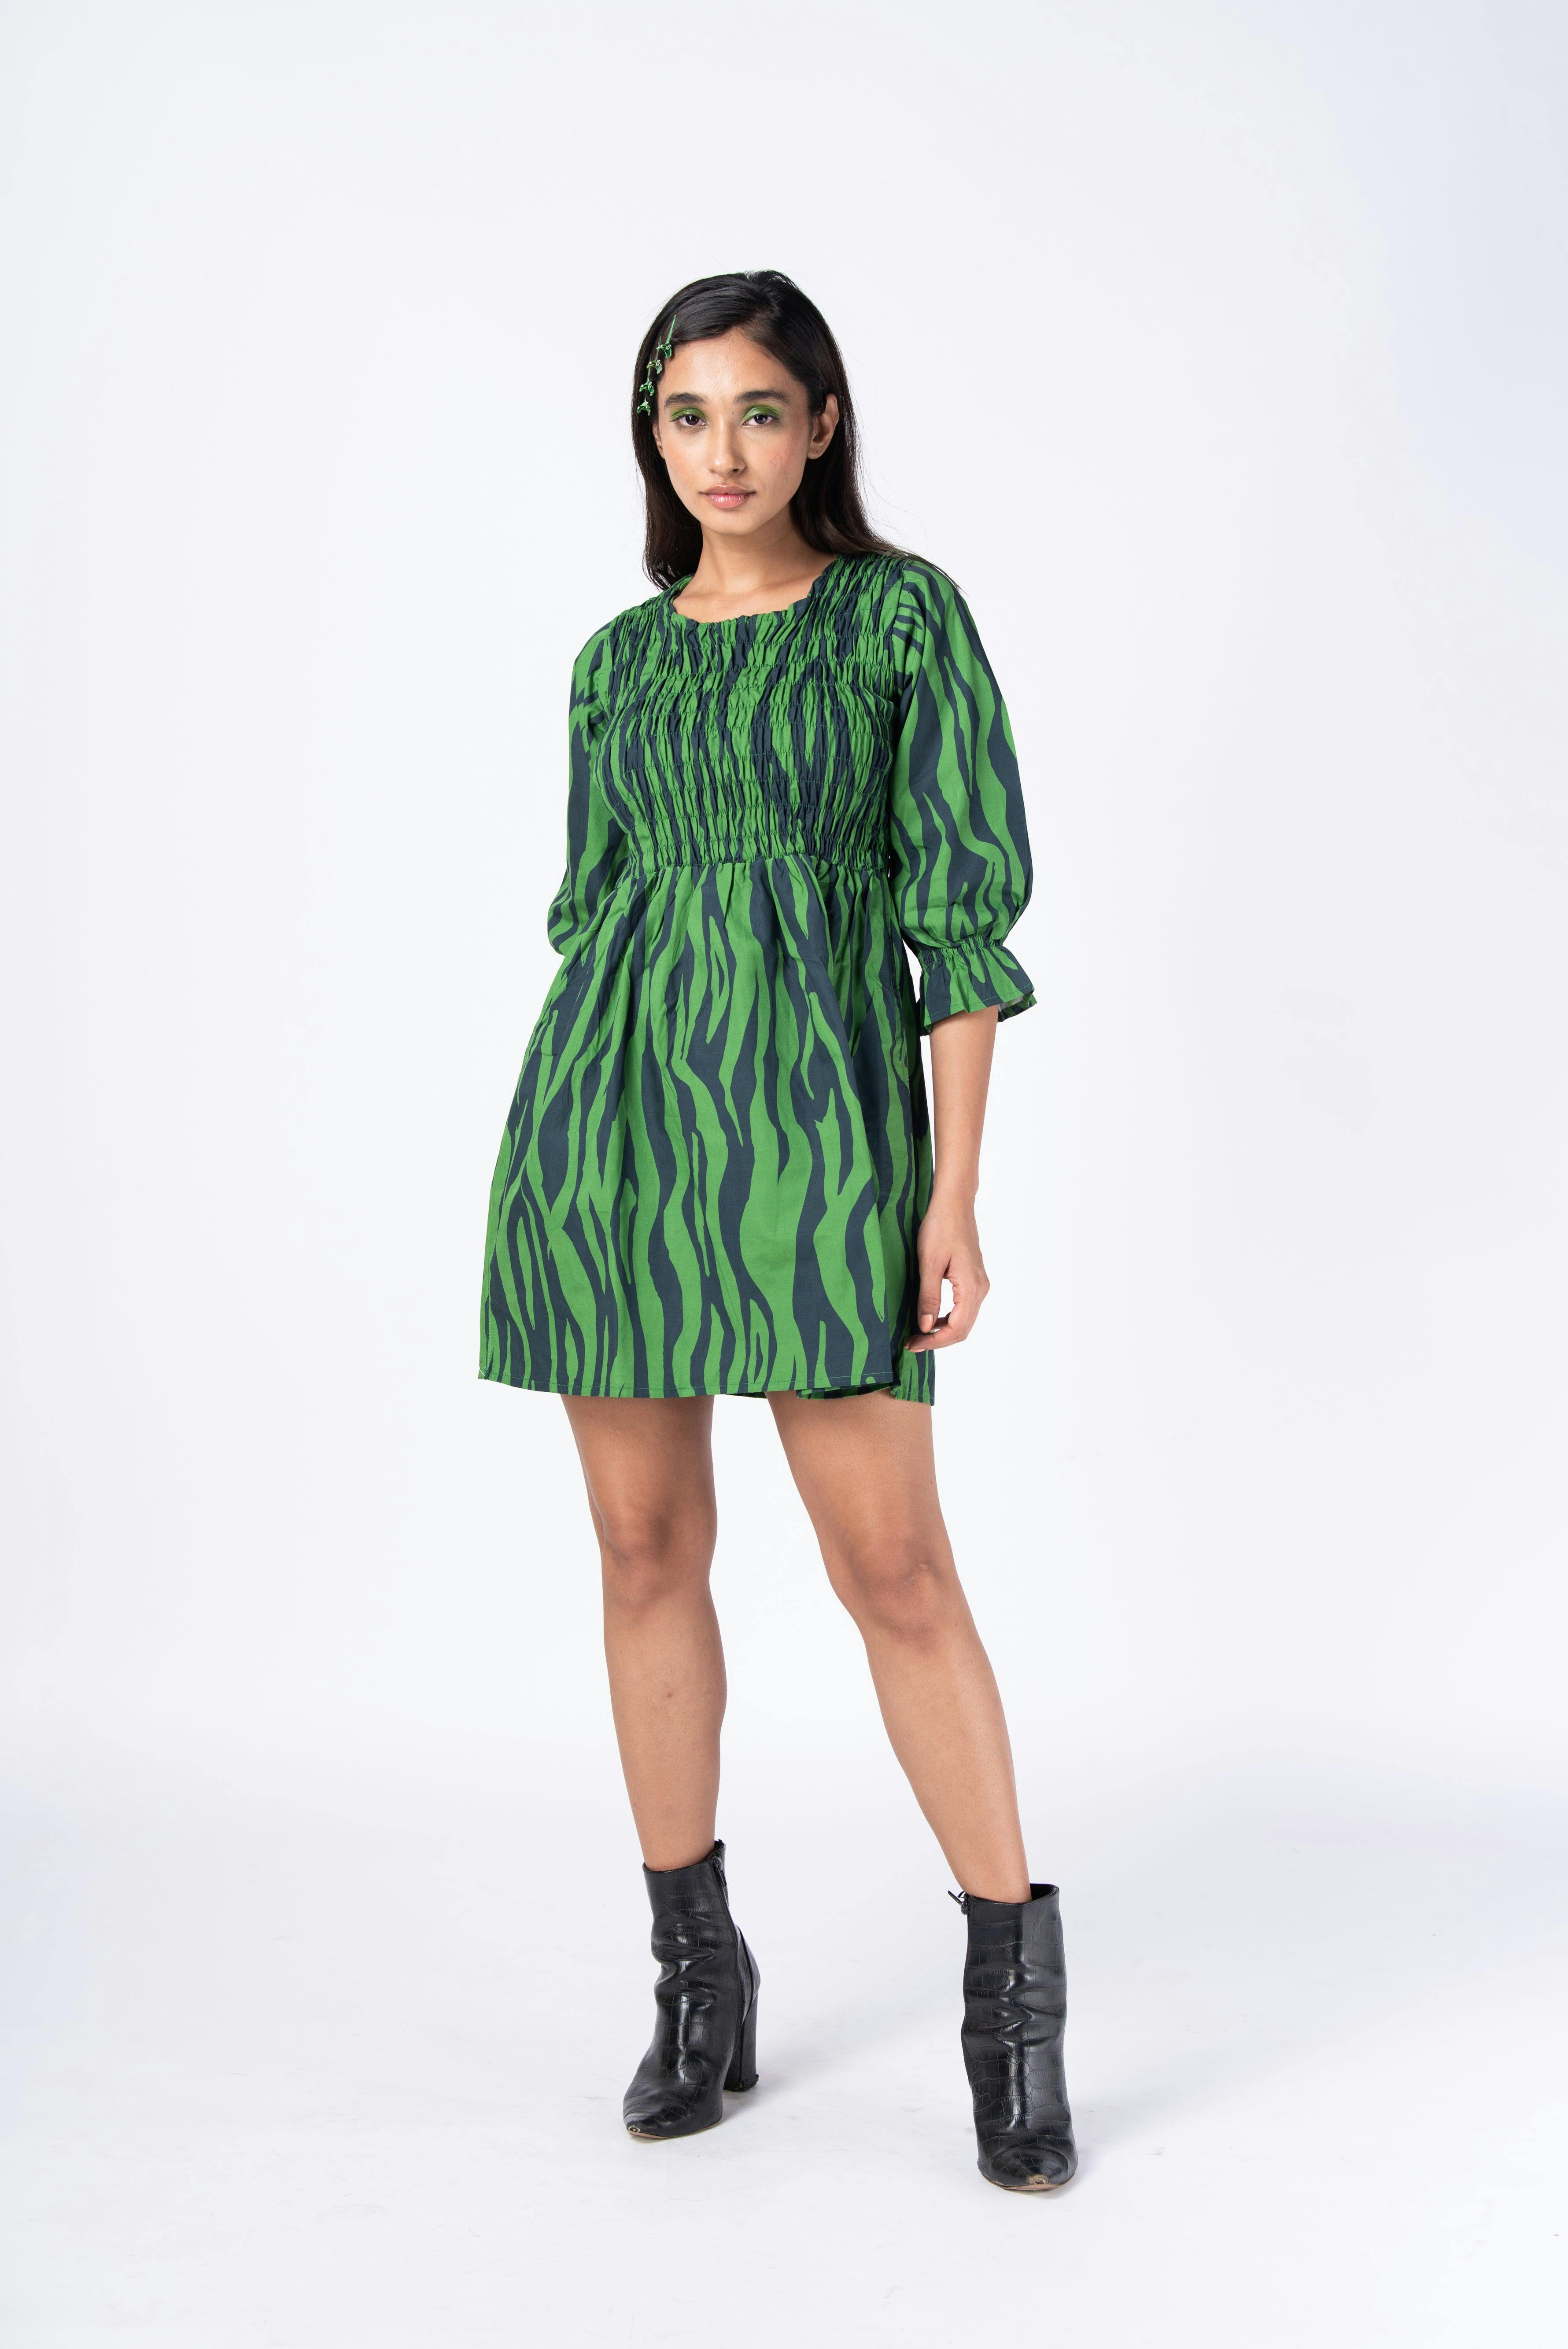 Zebra lines [elasticated dress], a product by Radharaman